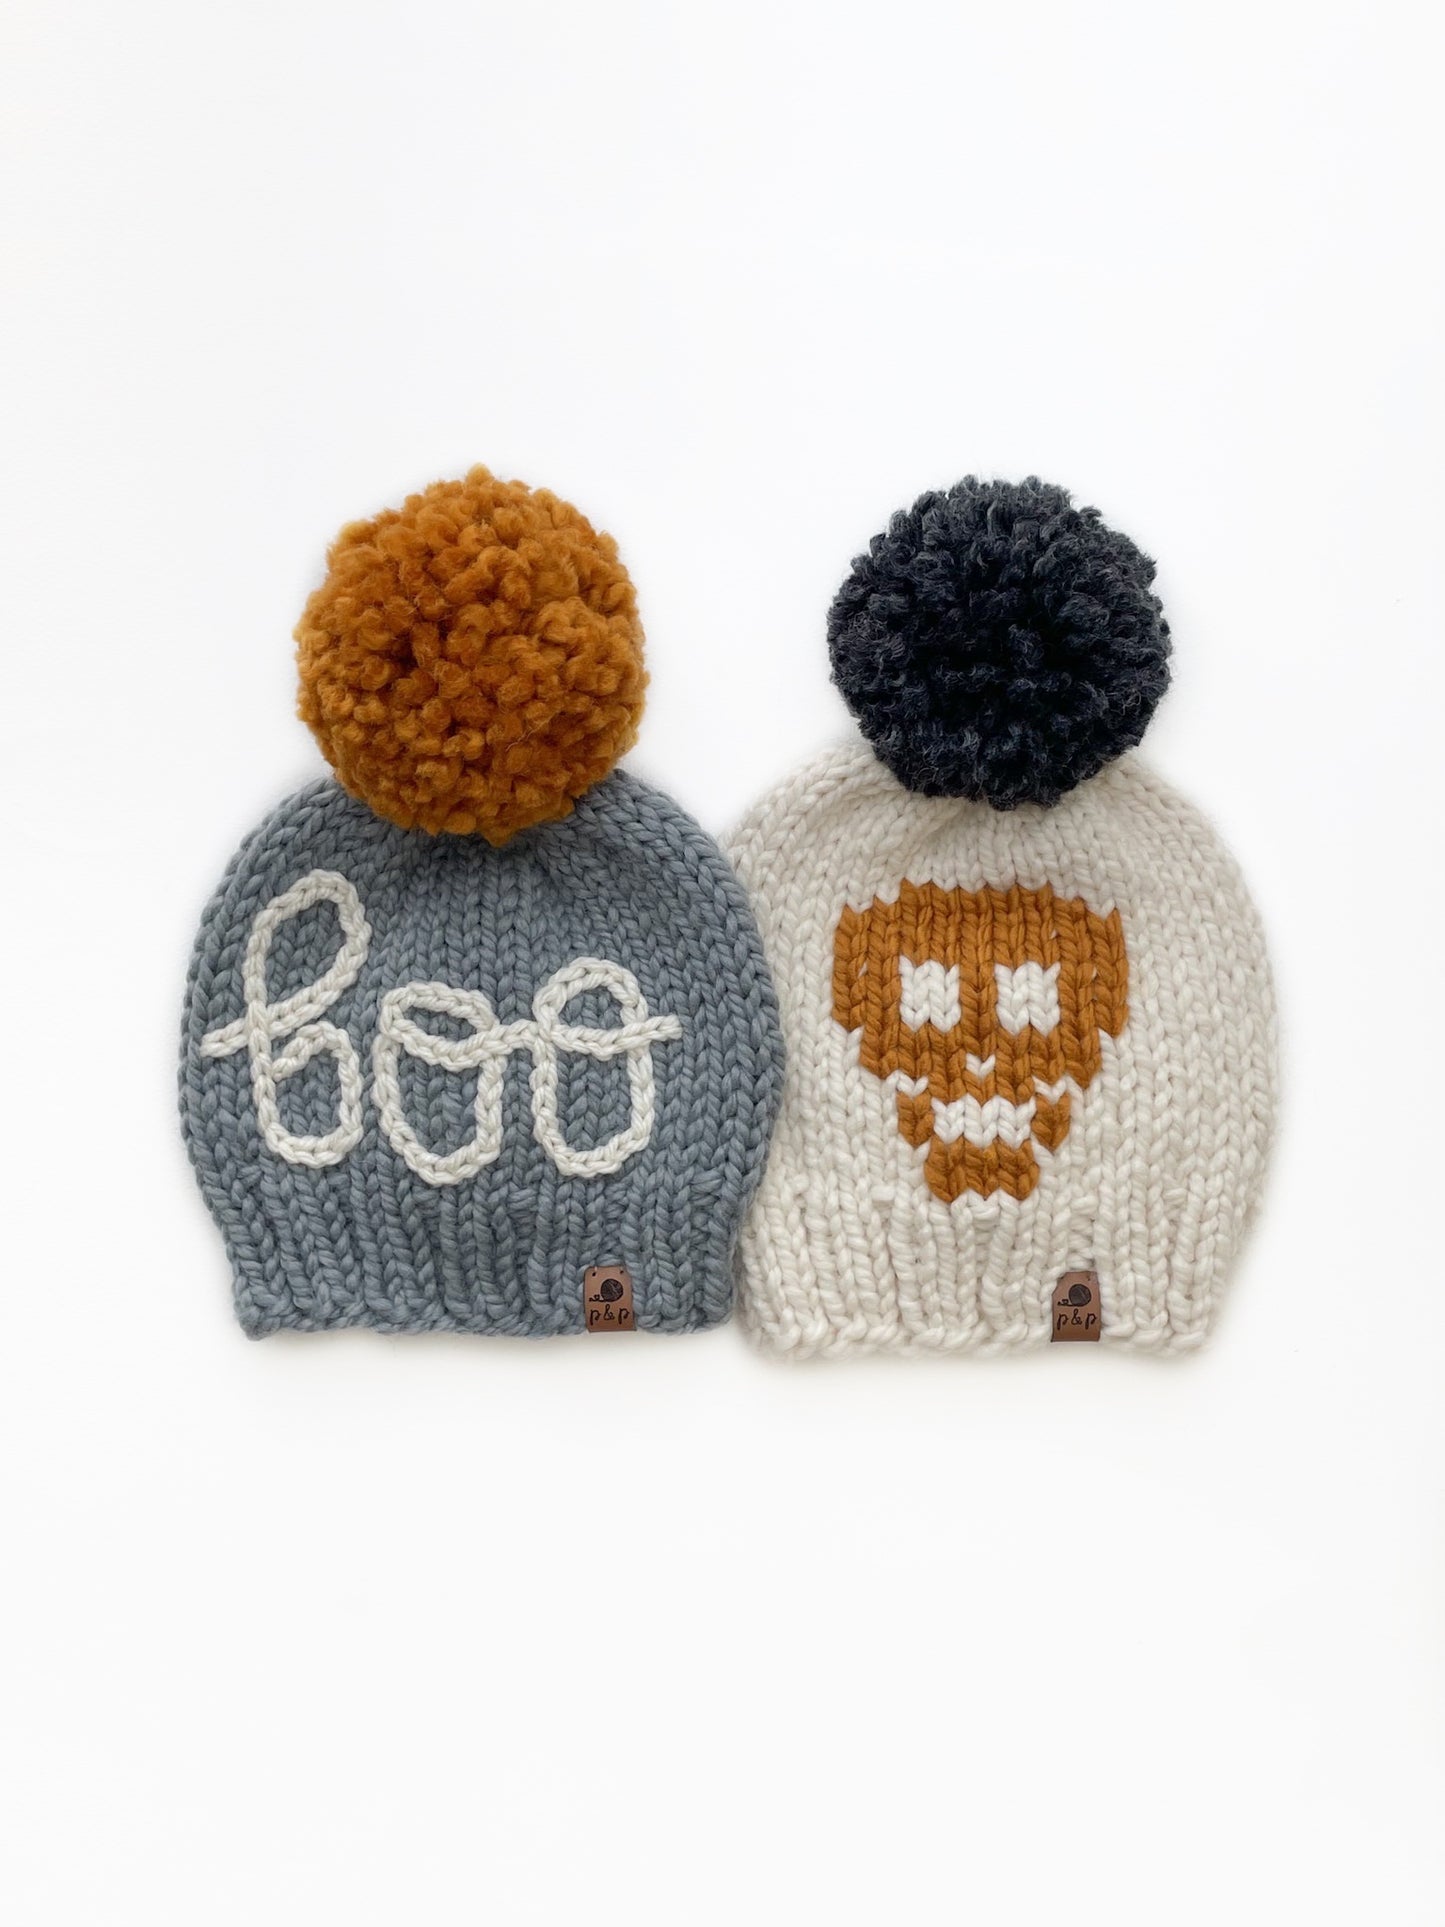 Embroidered Boo Hat